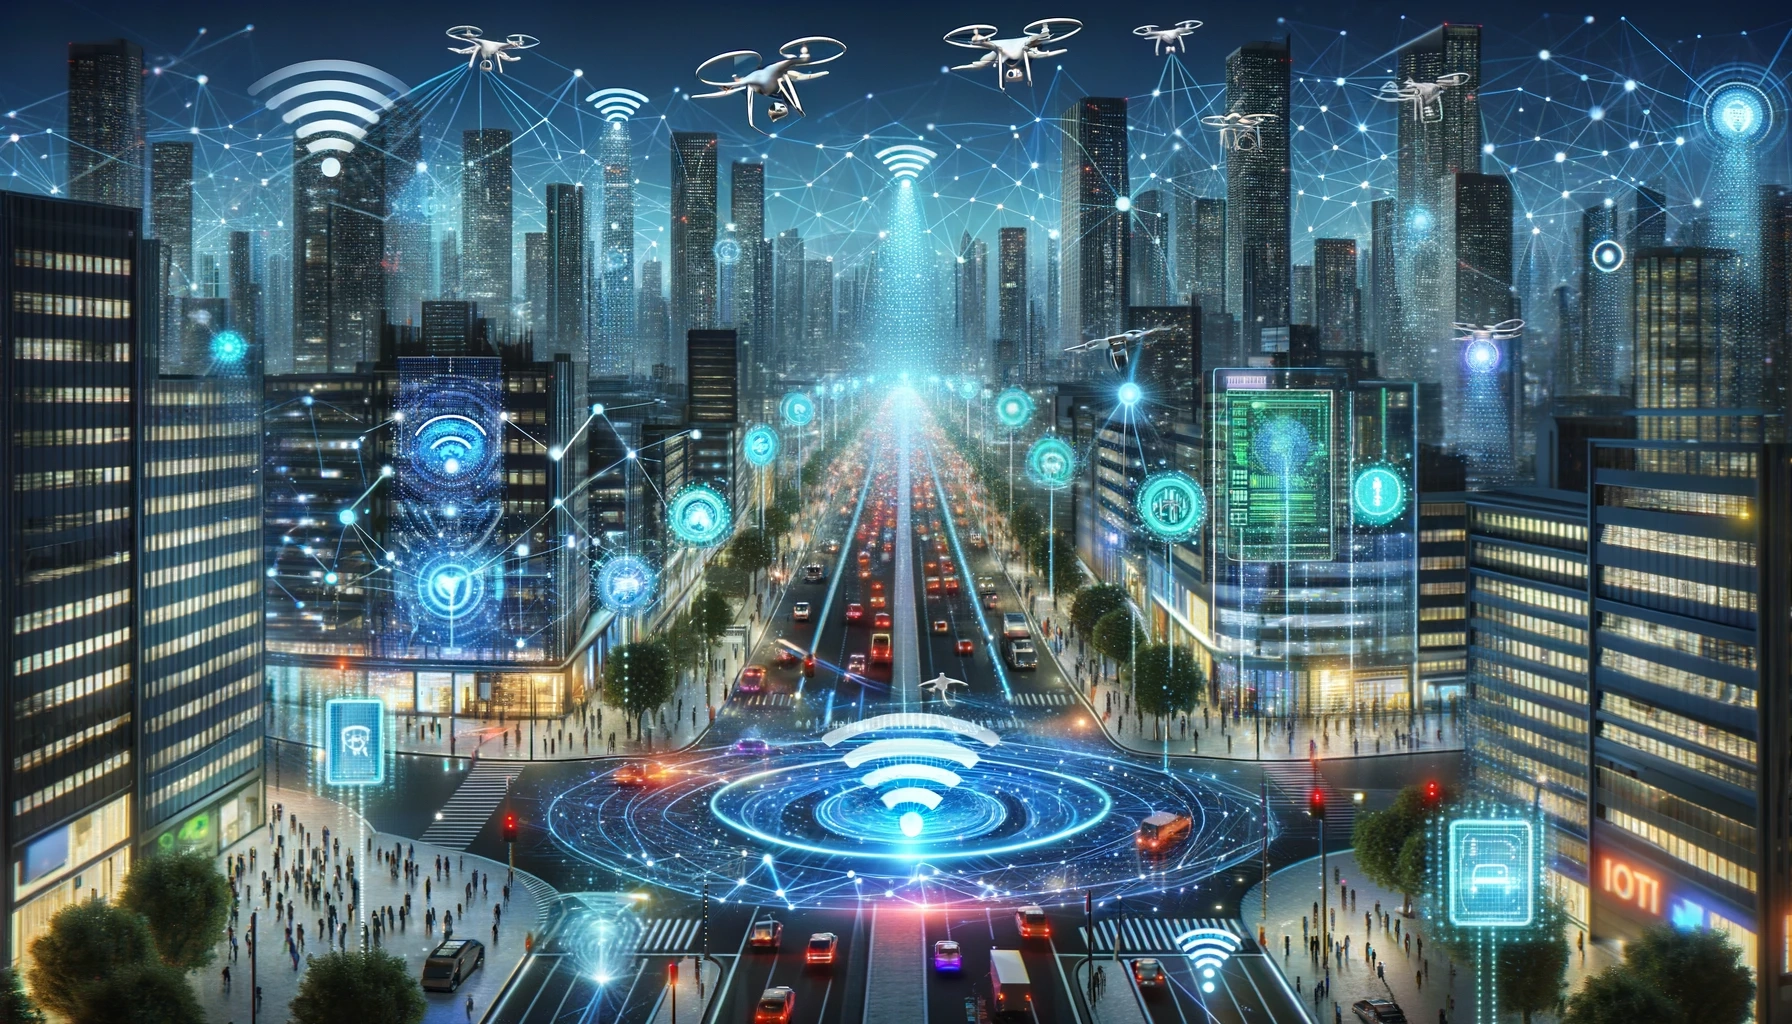 Spatial Computing and Wi-Fi Sensing Signal Major Advancements in Connected Living by 2030